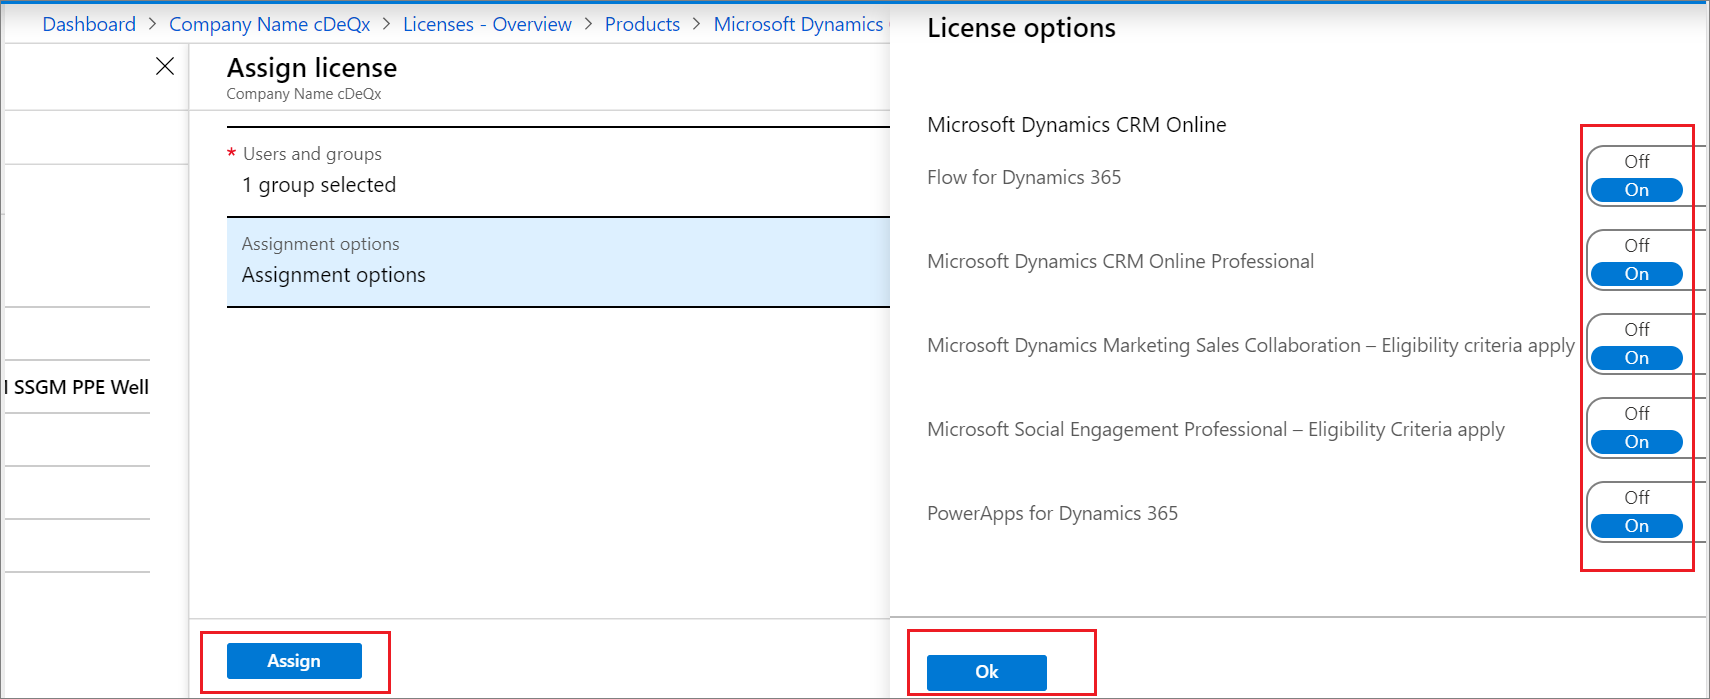 Screenshot of the License option page, with all options available in the license plan 2.